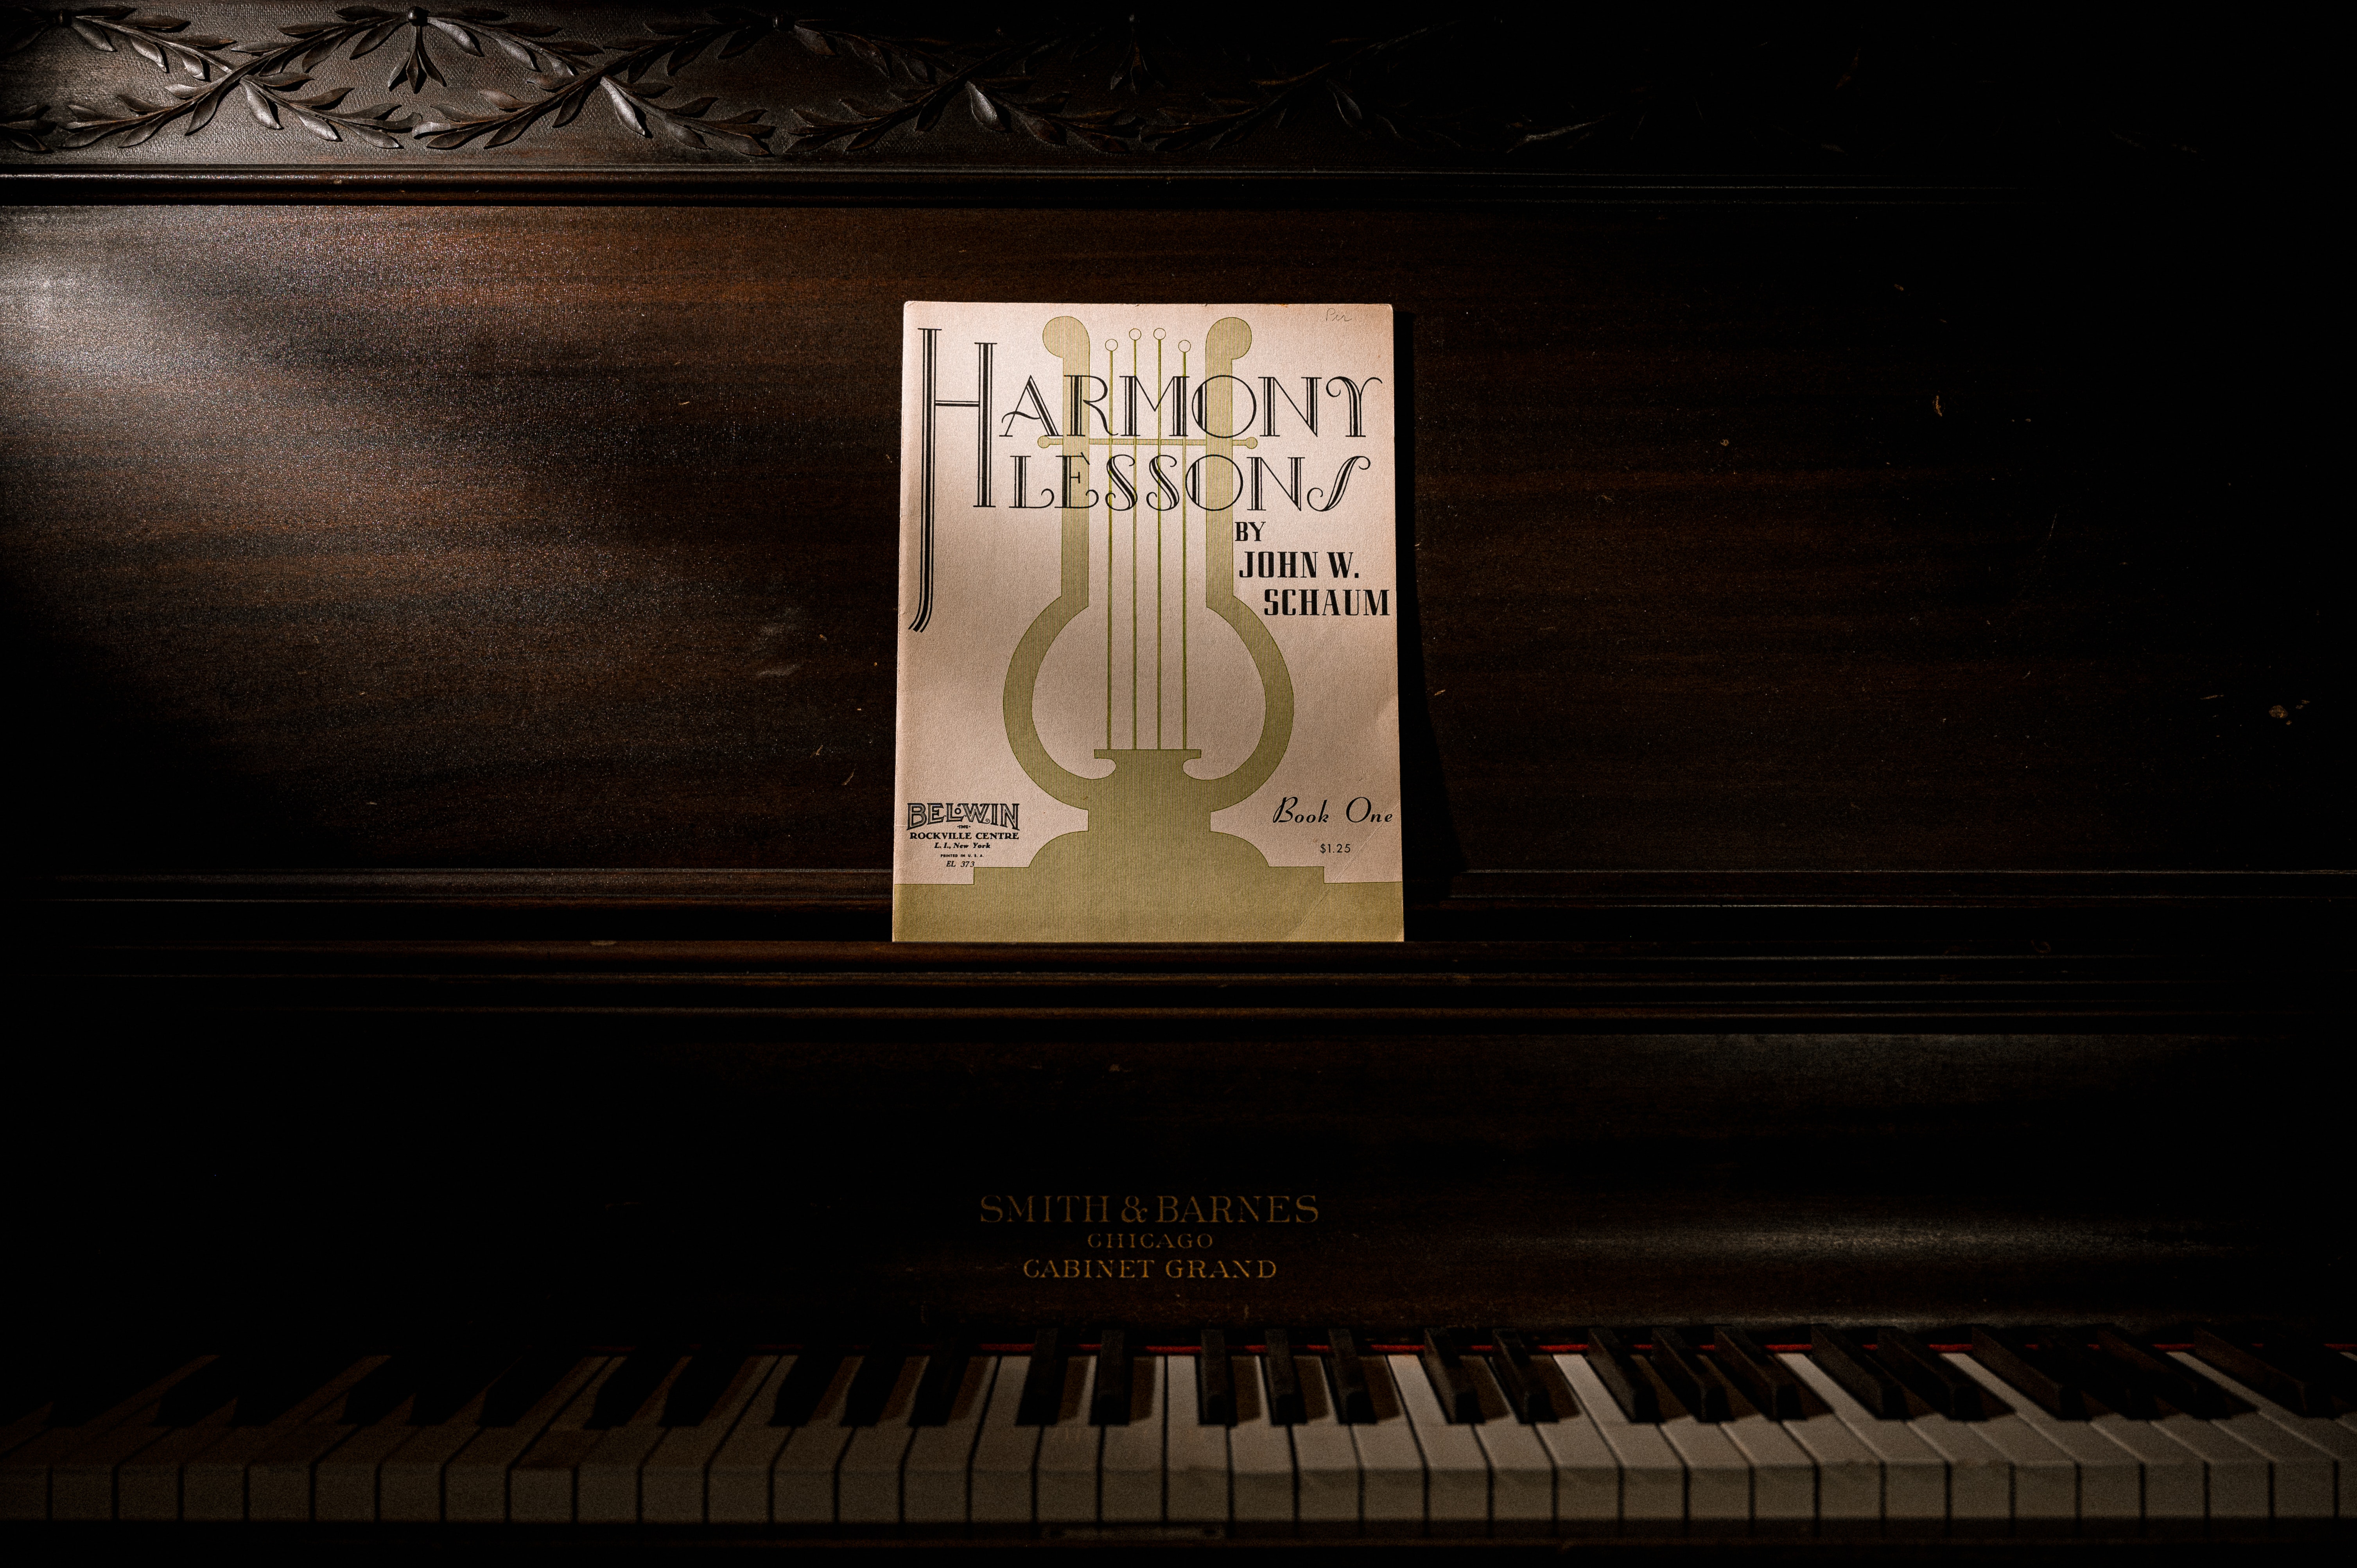 Harmony Lessons sheet music on piano